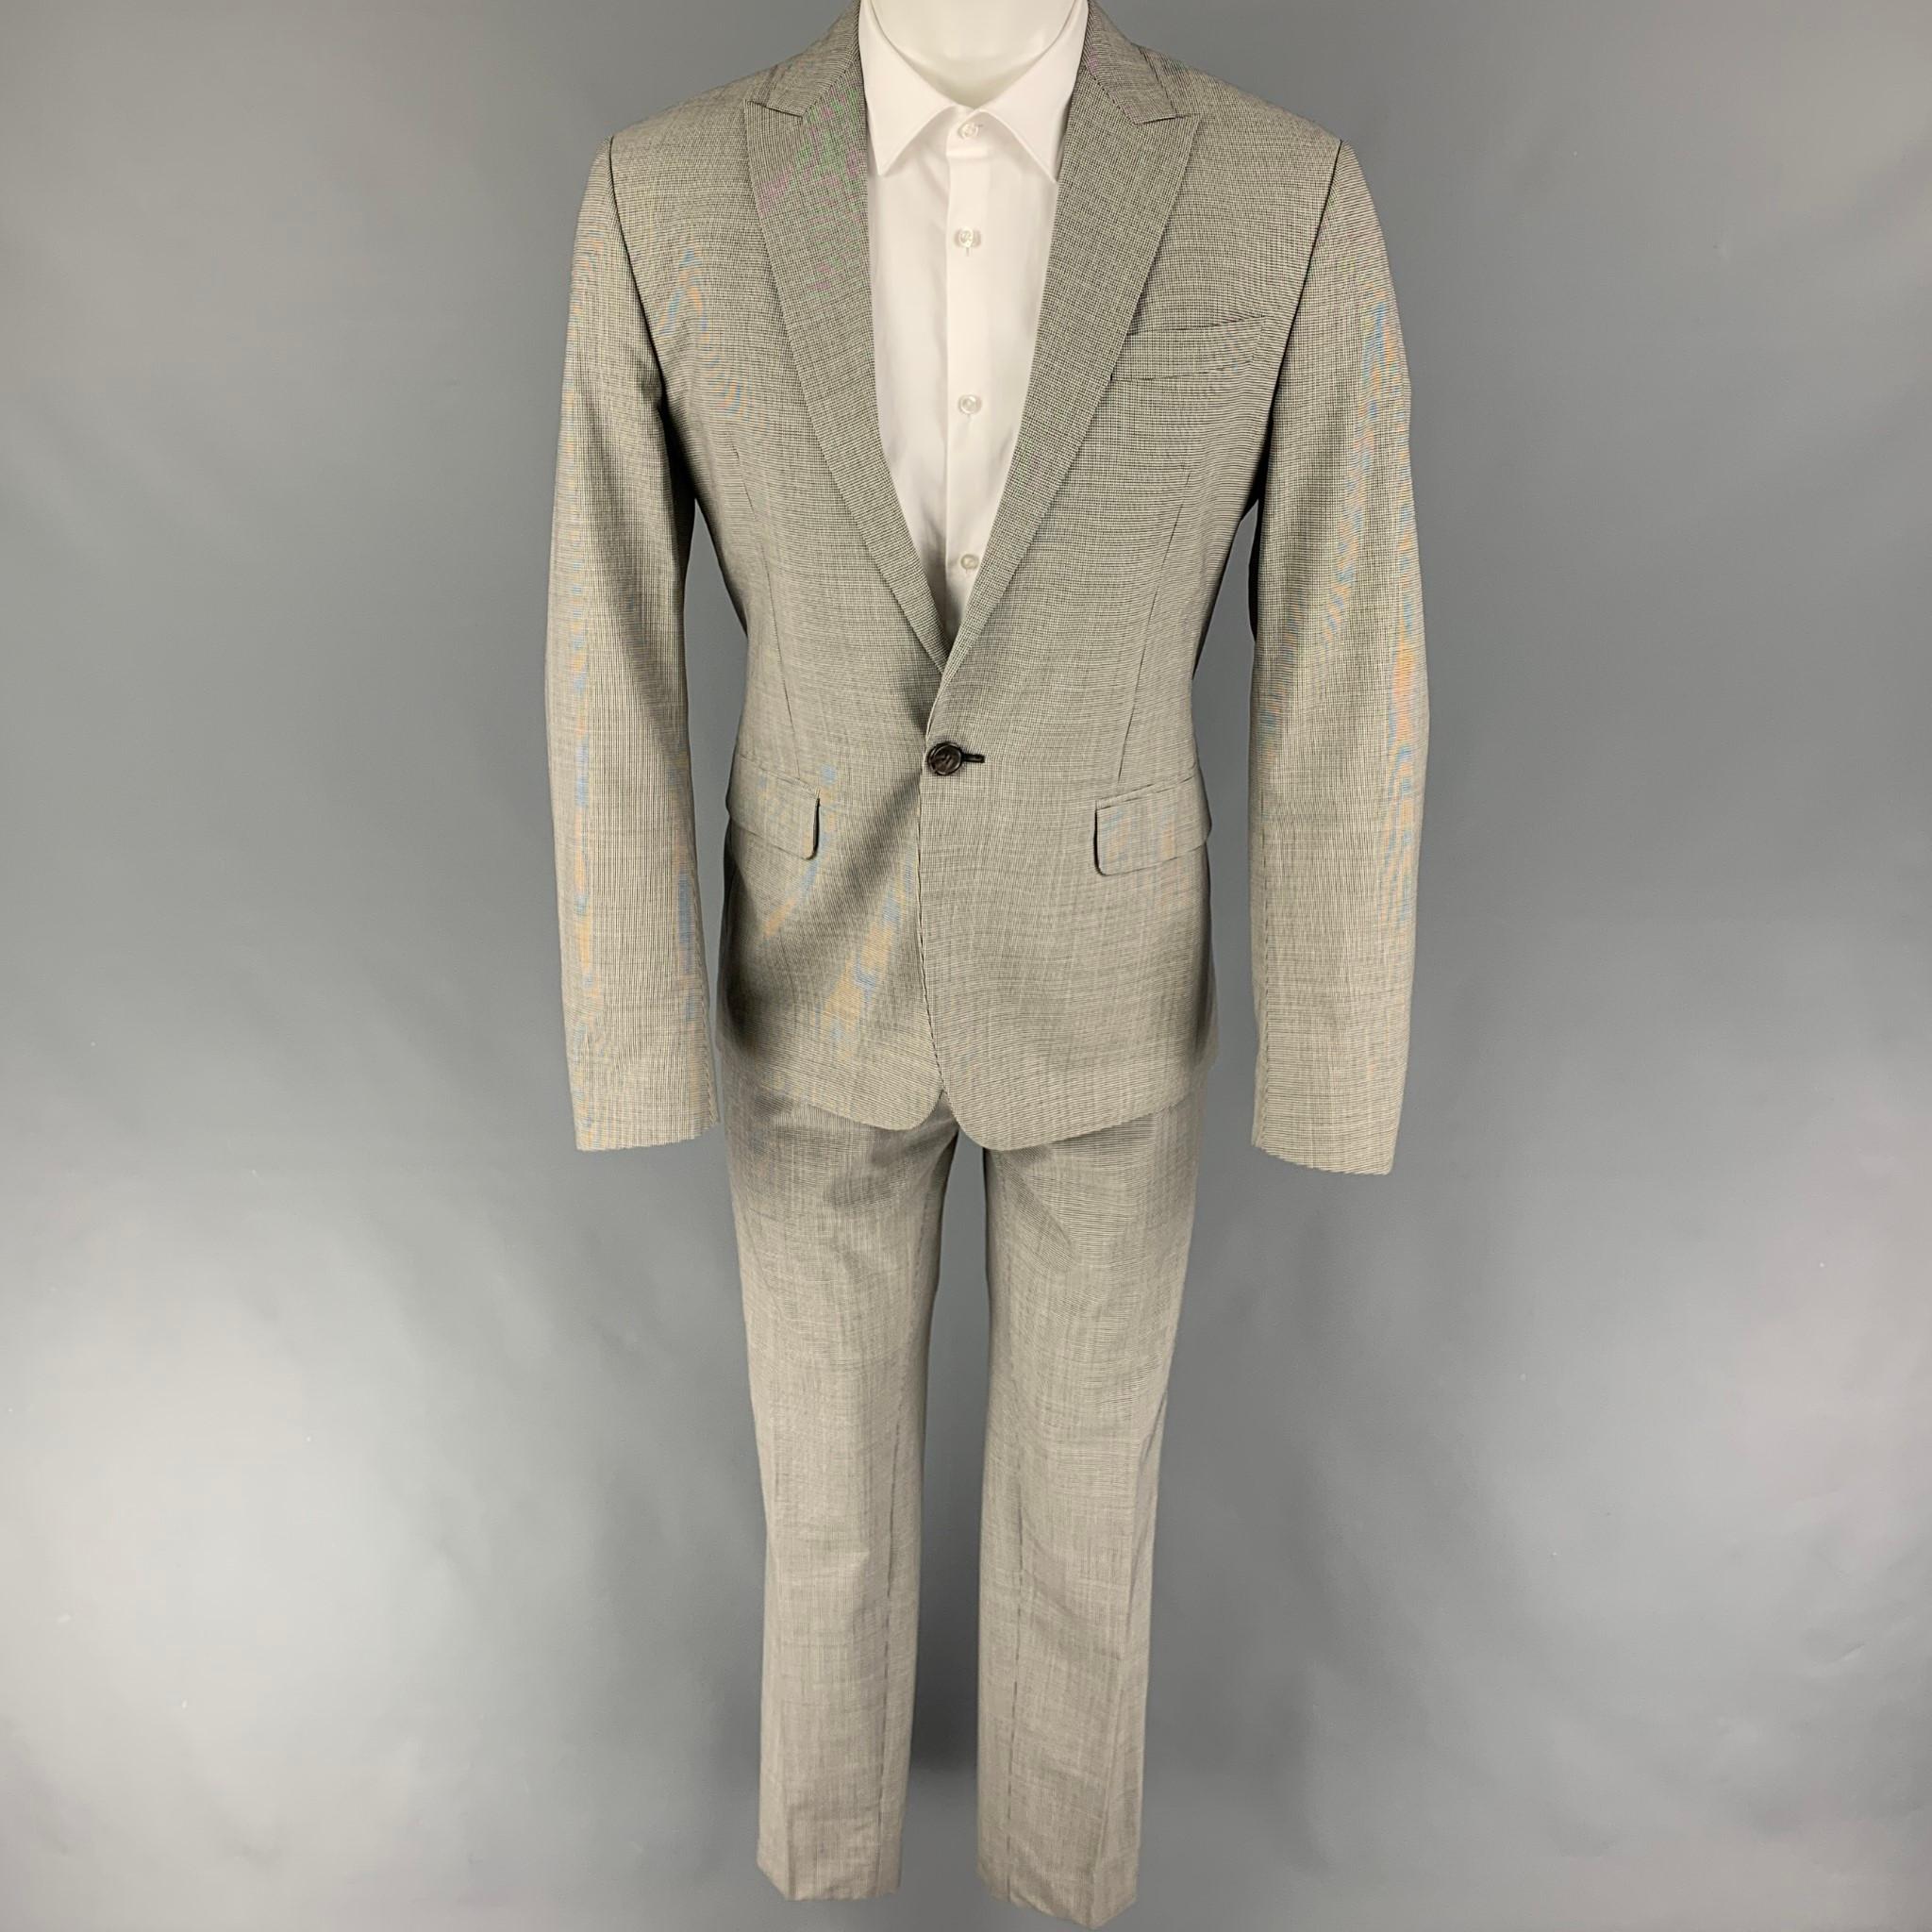 DSQUARED2 suit comes in a black & white houndstooth wool with a full liner and includes a single breasted, single button sport coat with a peak lapel and matching flat front trousers. Made in Italy.

Very Good Pre-Owned Condition.
Marked: